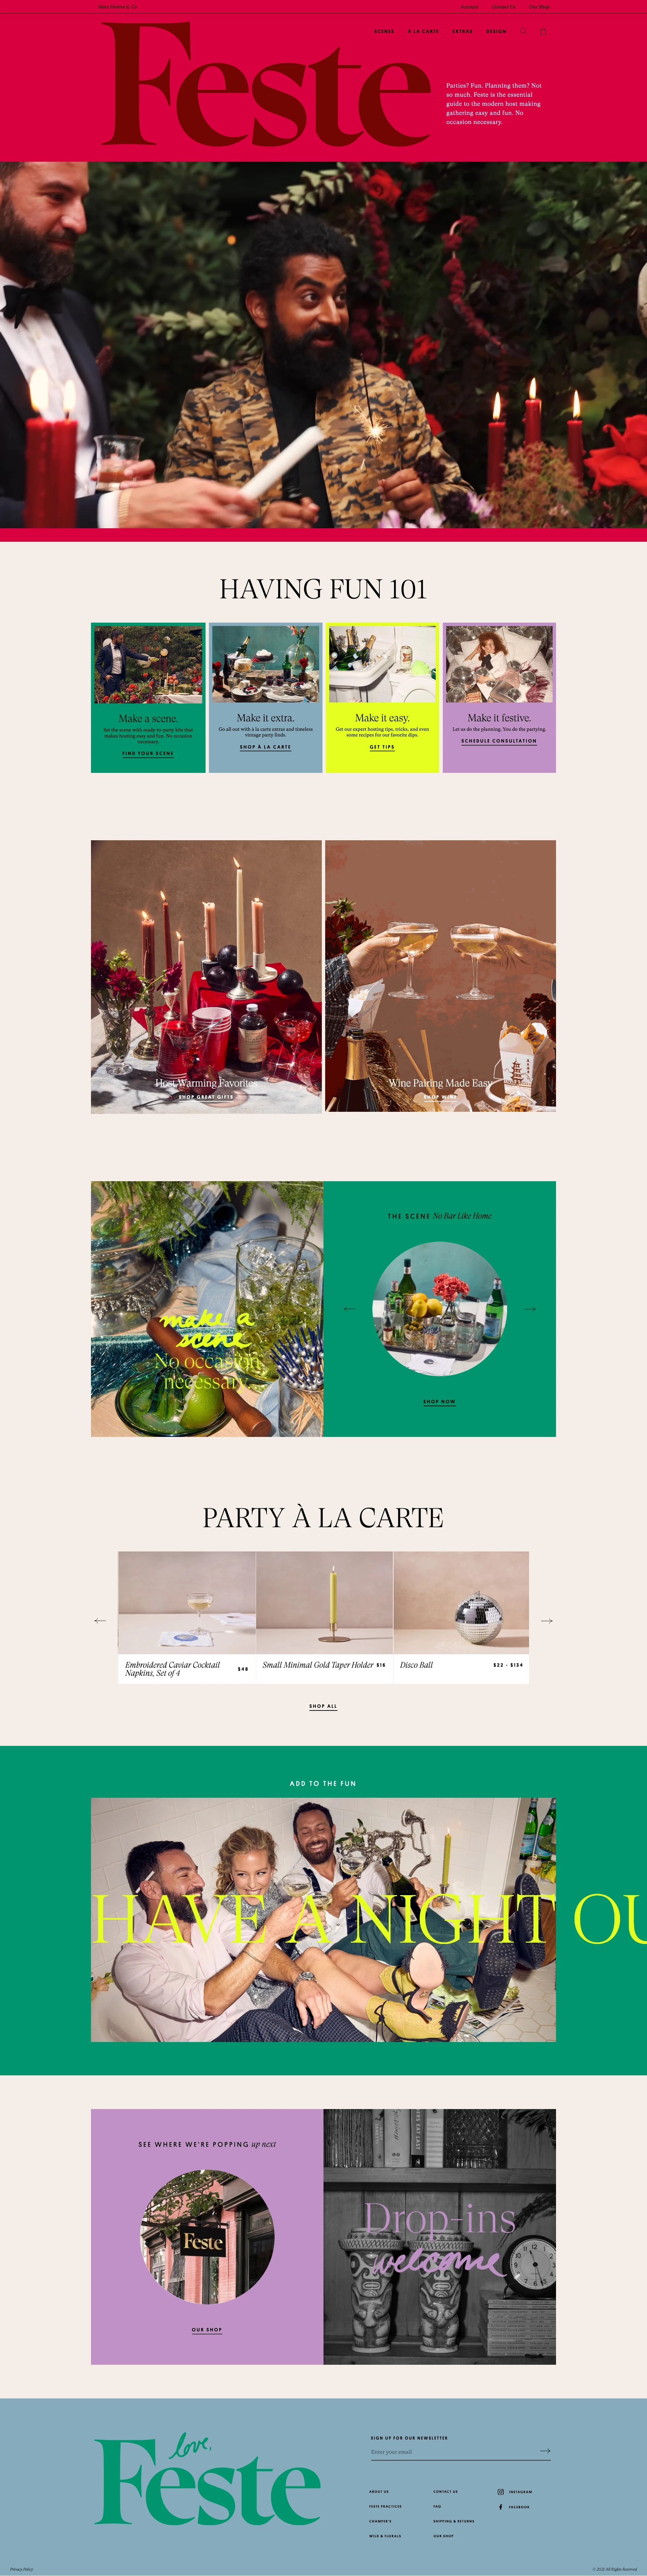 Feste Landing Page Example: Parties? Fun. Planning them? Not so much. Feste is the essential resource for the modern host, making gathering easy and fun. No occasion necessary.